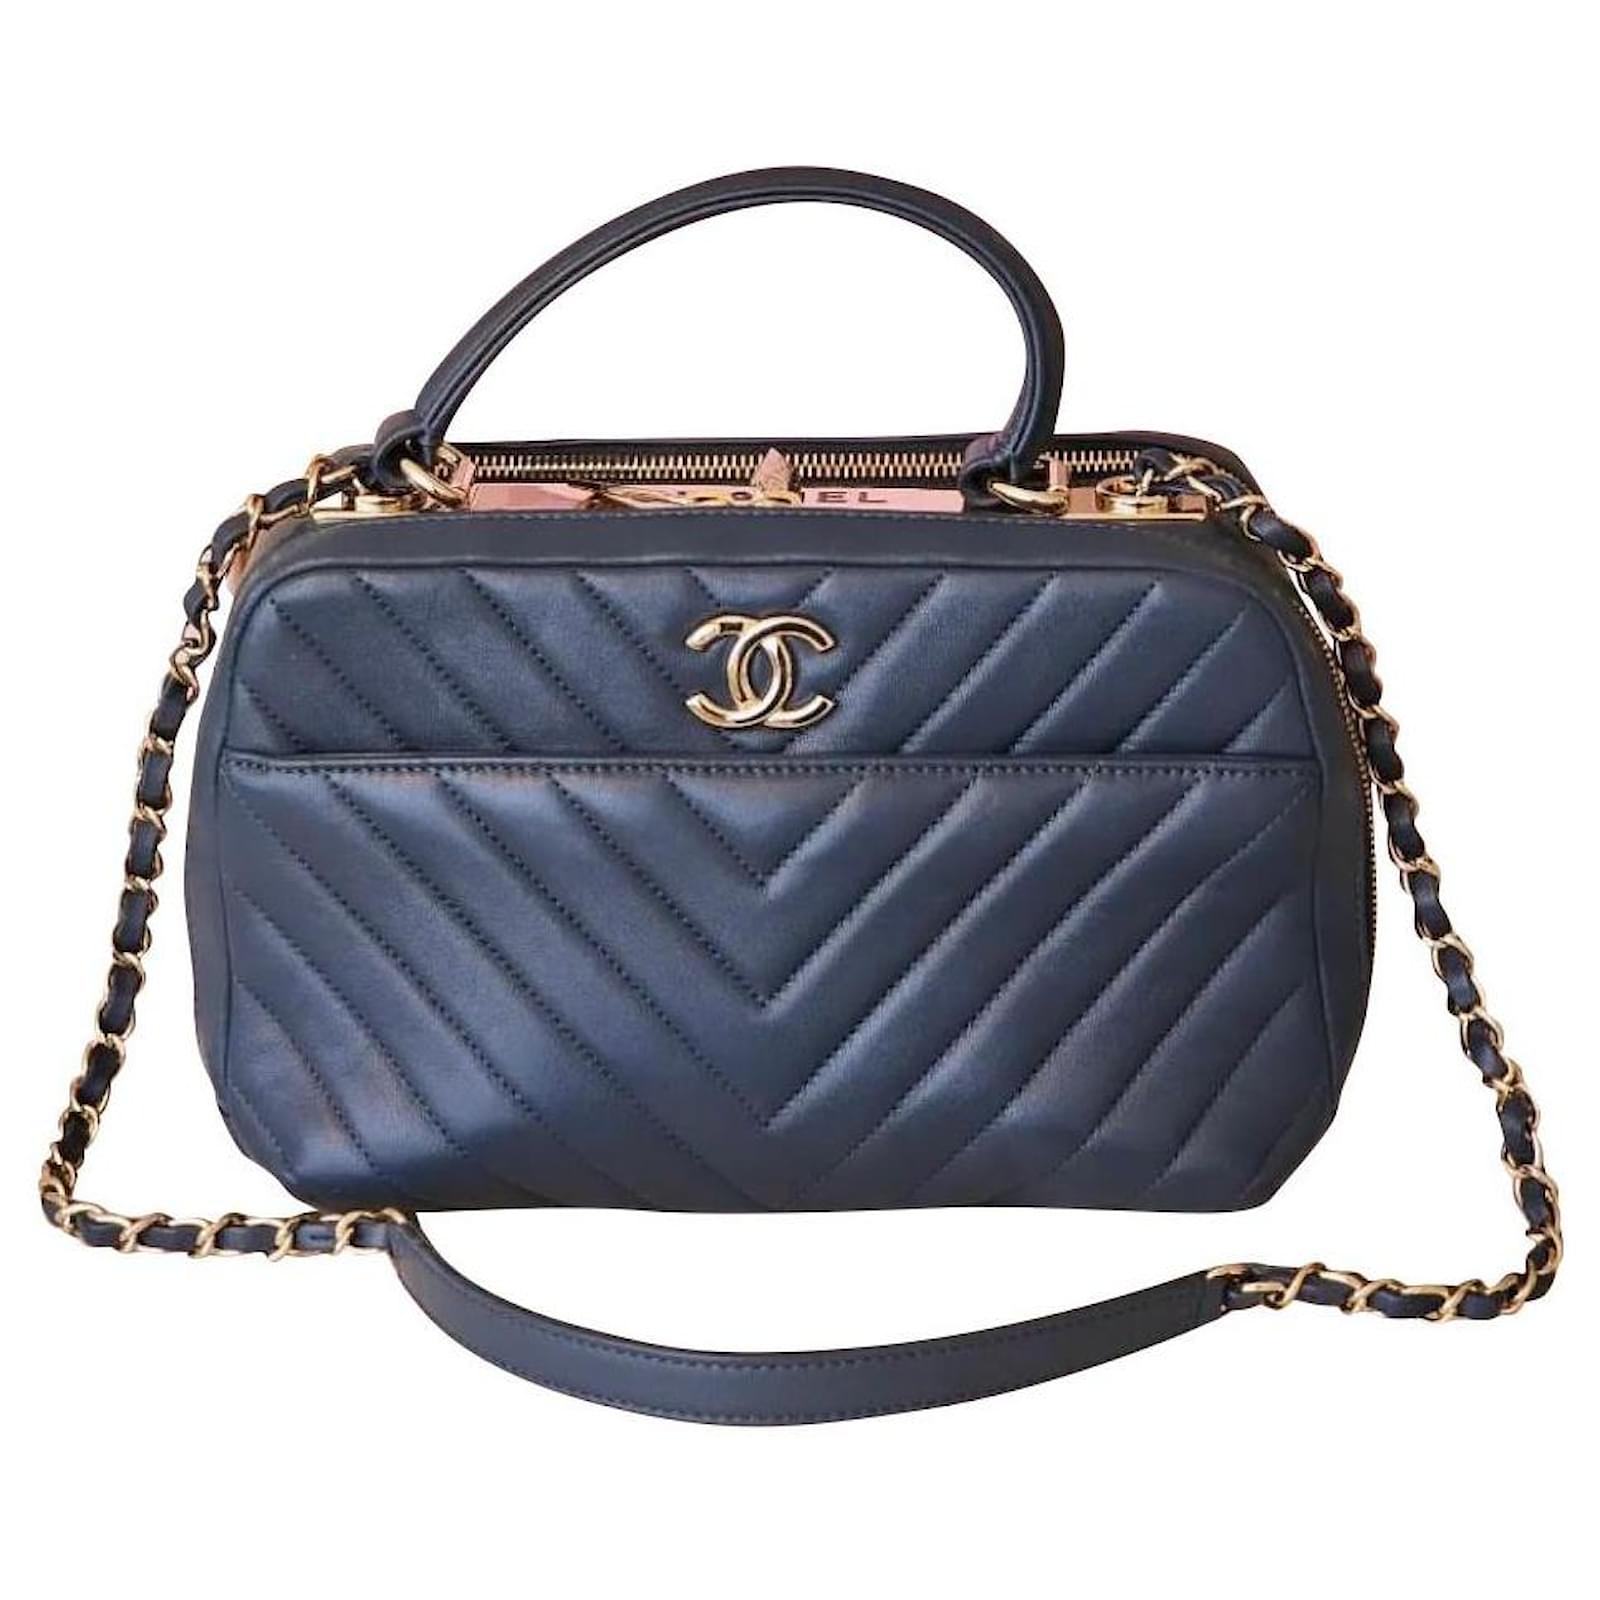 Chanel 2019 Medium Chevron Trendy CC bowling bag in Navy Blue with Gold  Hardware